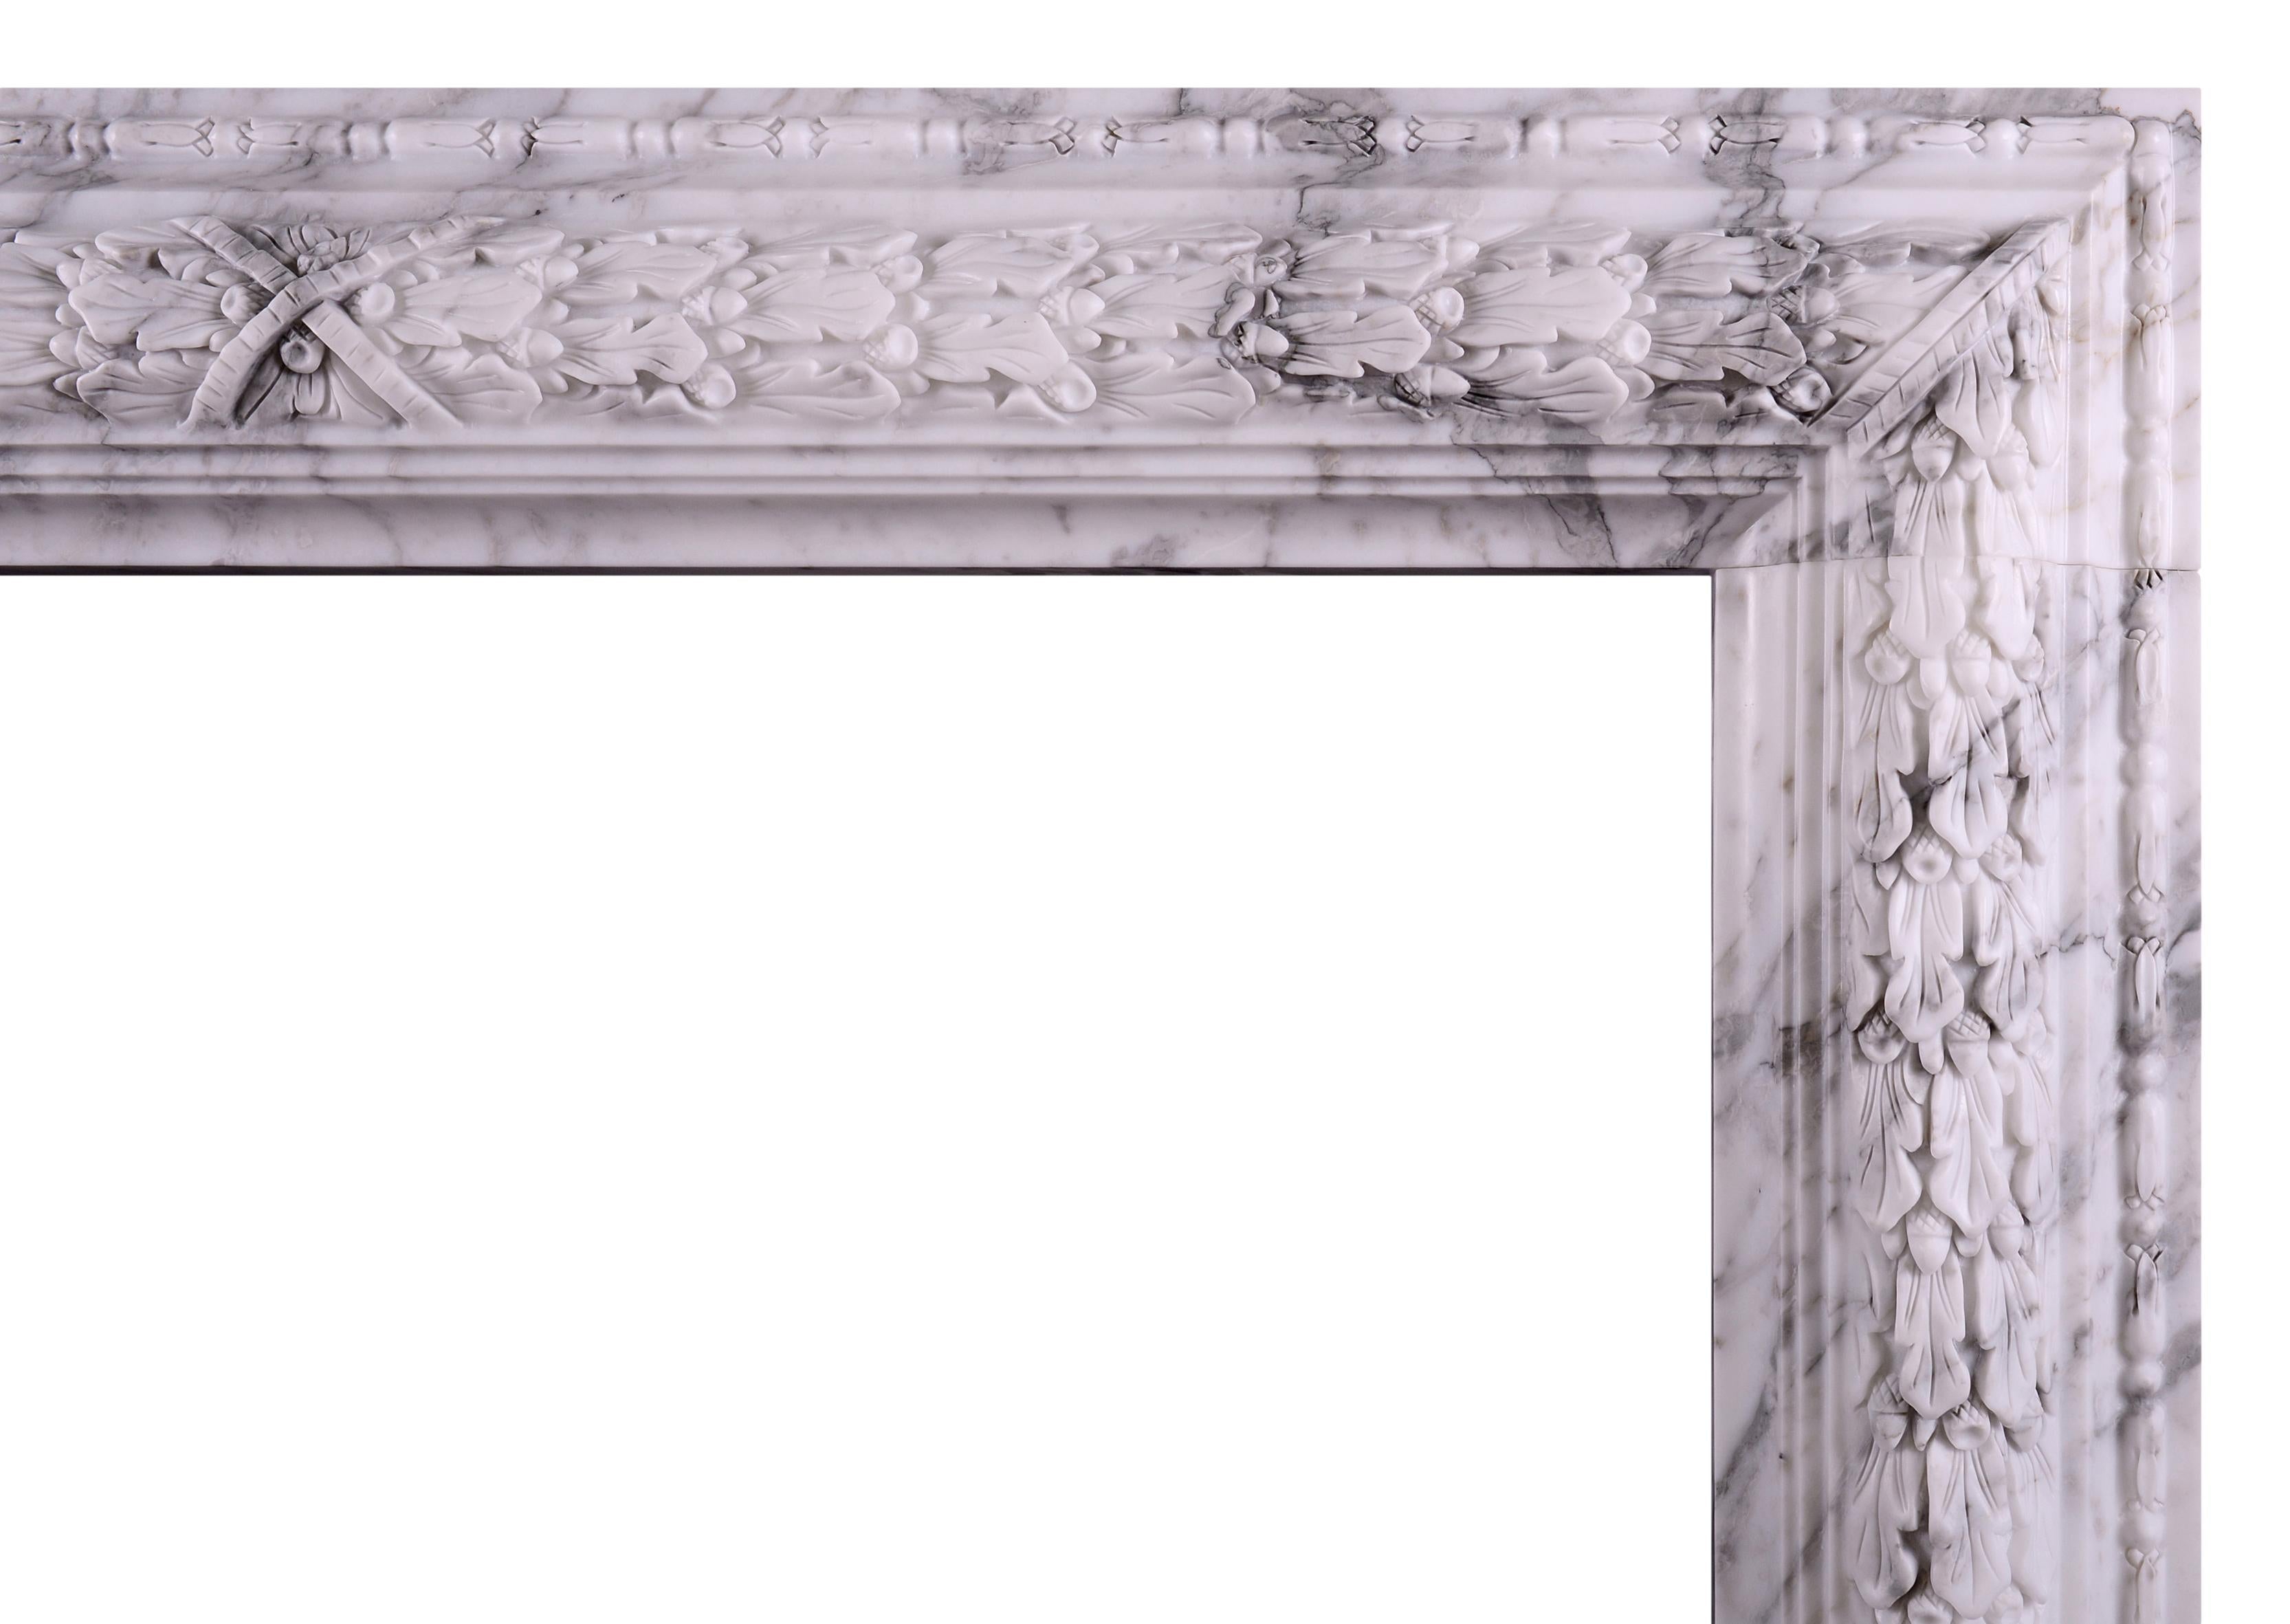 An elegant and understated bolection moulded fireplace in Italian Arabescato marble. The frieze with carved oak leaf decoration and crossbanded centre ribbon. A copy of a period original. Could be made to any size in various materials if